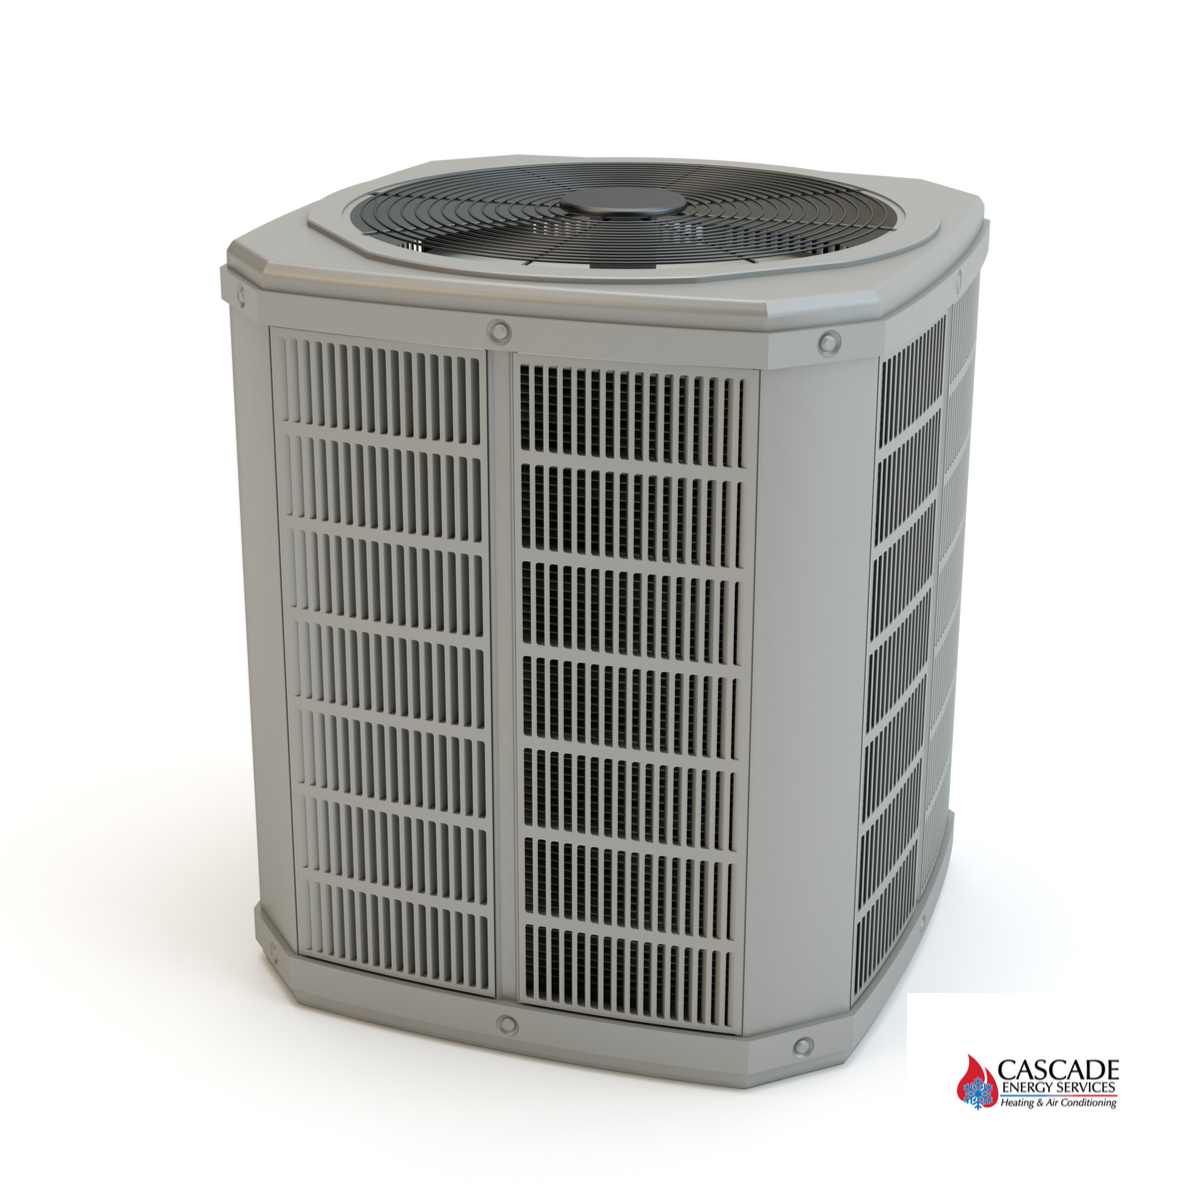 Call Us For Heat Pump Service In Everett!